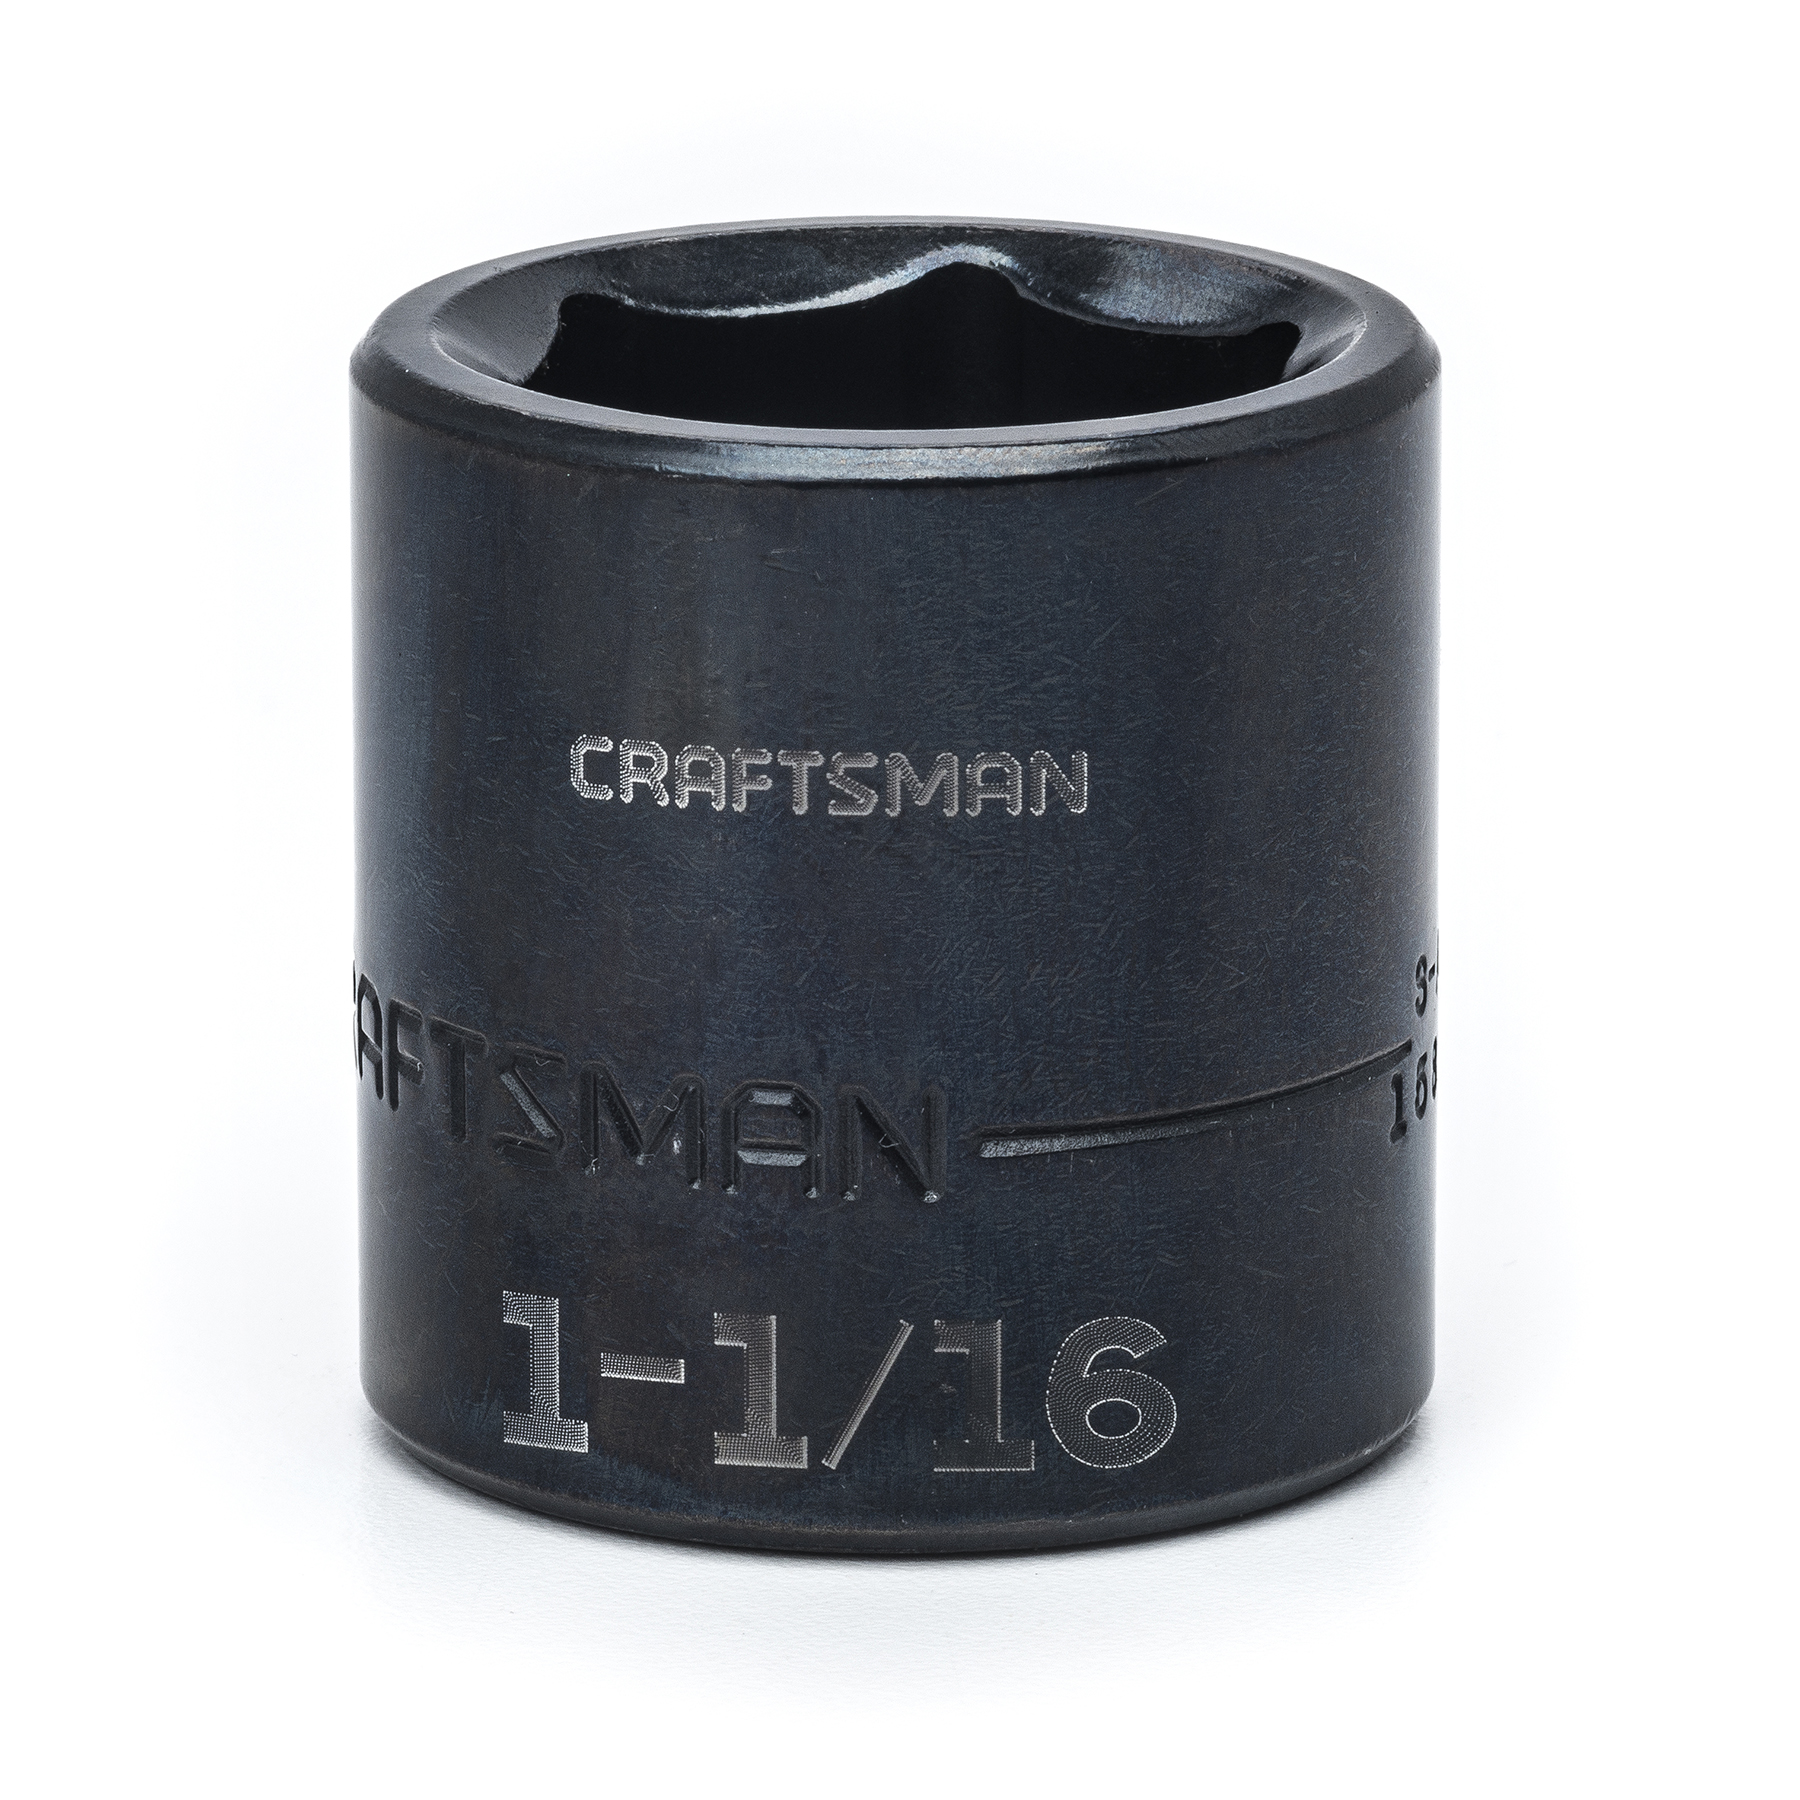 Craftsman 1 1/16 in., 6 pt. 1/2 in. Drive, Easy-To-Read Impact Socket